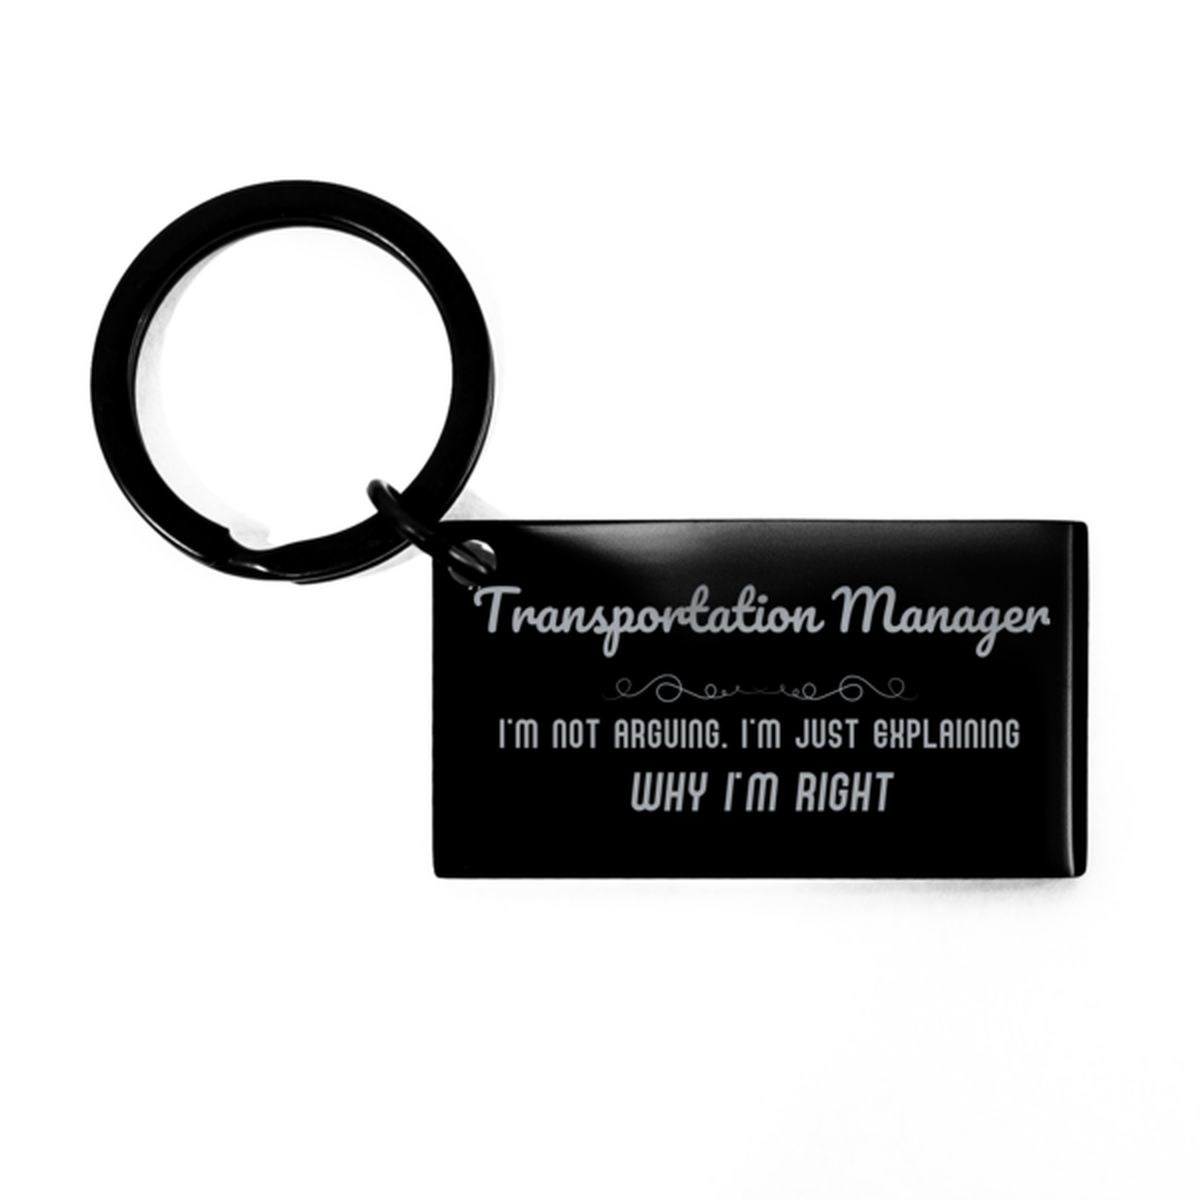 Transportation Manager I'm not Arguing. I'm Just Explaining Why I'm RIGHT Keychain, Funny Saying Quote Transportation Manager Gifts For Transportation Manager Graduation Birthday Christmas Gifts for Men Women Coworker